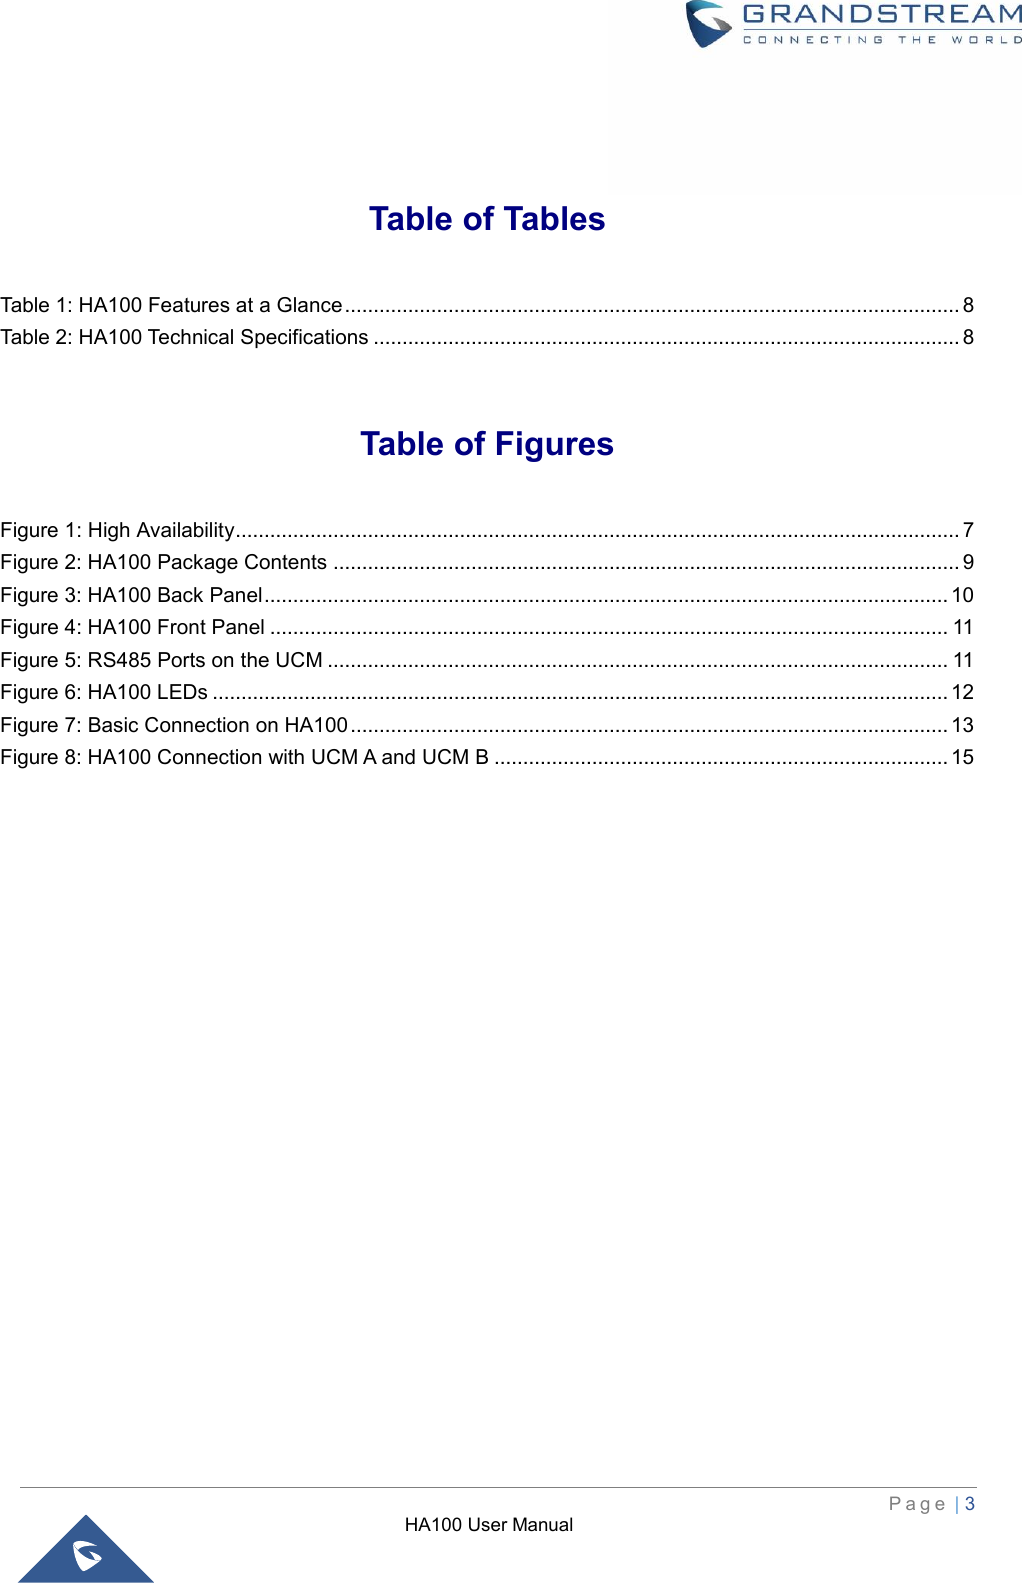 HA100 User Manual  P a g e  | 3    Table of Tables Table 1: HA100 Features at a Glance ........................................................................................................... 8 Table 2: HA100 Technical Specifications ...................................................................................................... 8  Table of Figures Figure 1: High Availability .............................................................................................................................. 7 Figure 2: HA100 Package Contents ............................................................................................................. 9 Figure 3: HA100 Back Panel ....................................................................................................................... 10 Figure 4: HA100 Front Panel ...................................................................................................................... 11 Figure 5: RS485 Ports on the UCM ............................................................................................................ 11 Figure 6: HA100 LEDs ................................................................................................................................ 12 Figure 7: Basic Connection on HA100 ........................................................................................................ 13 Figure 8: HA100 Connection with UCM A and UCM B ............................................................................... 15 